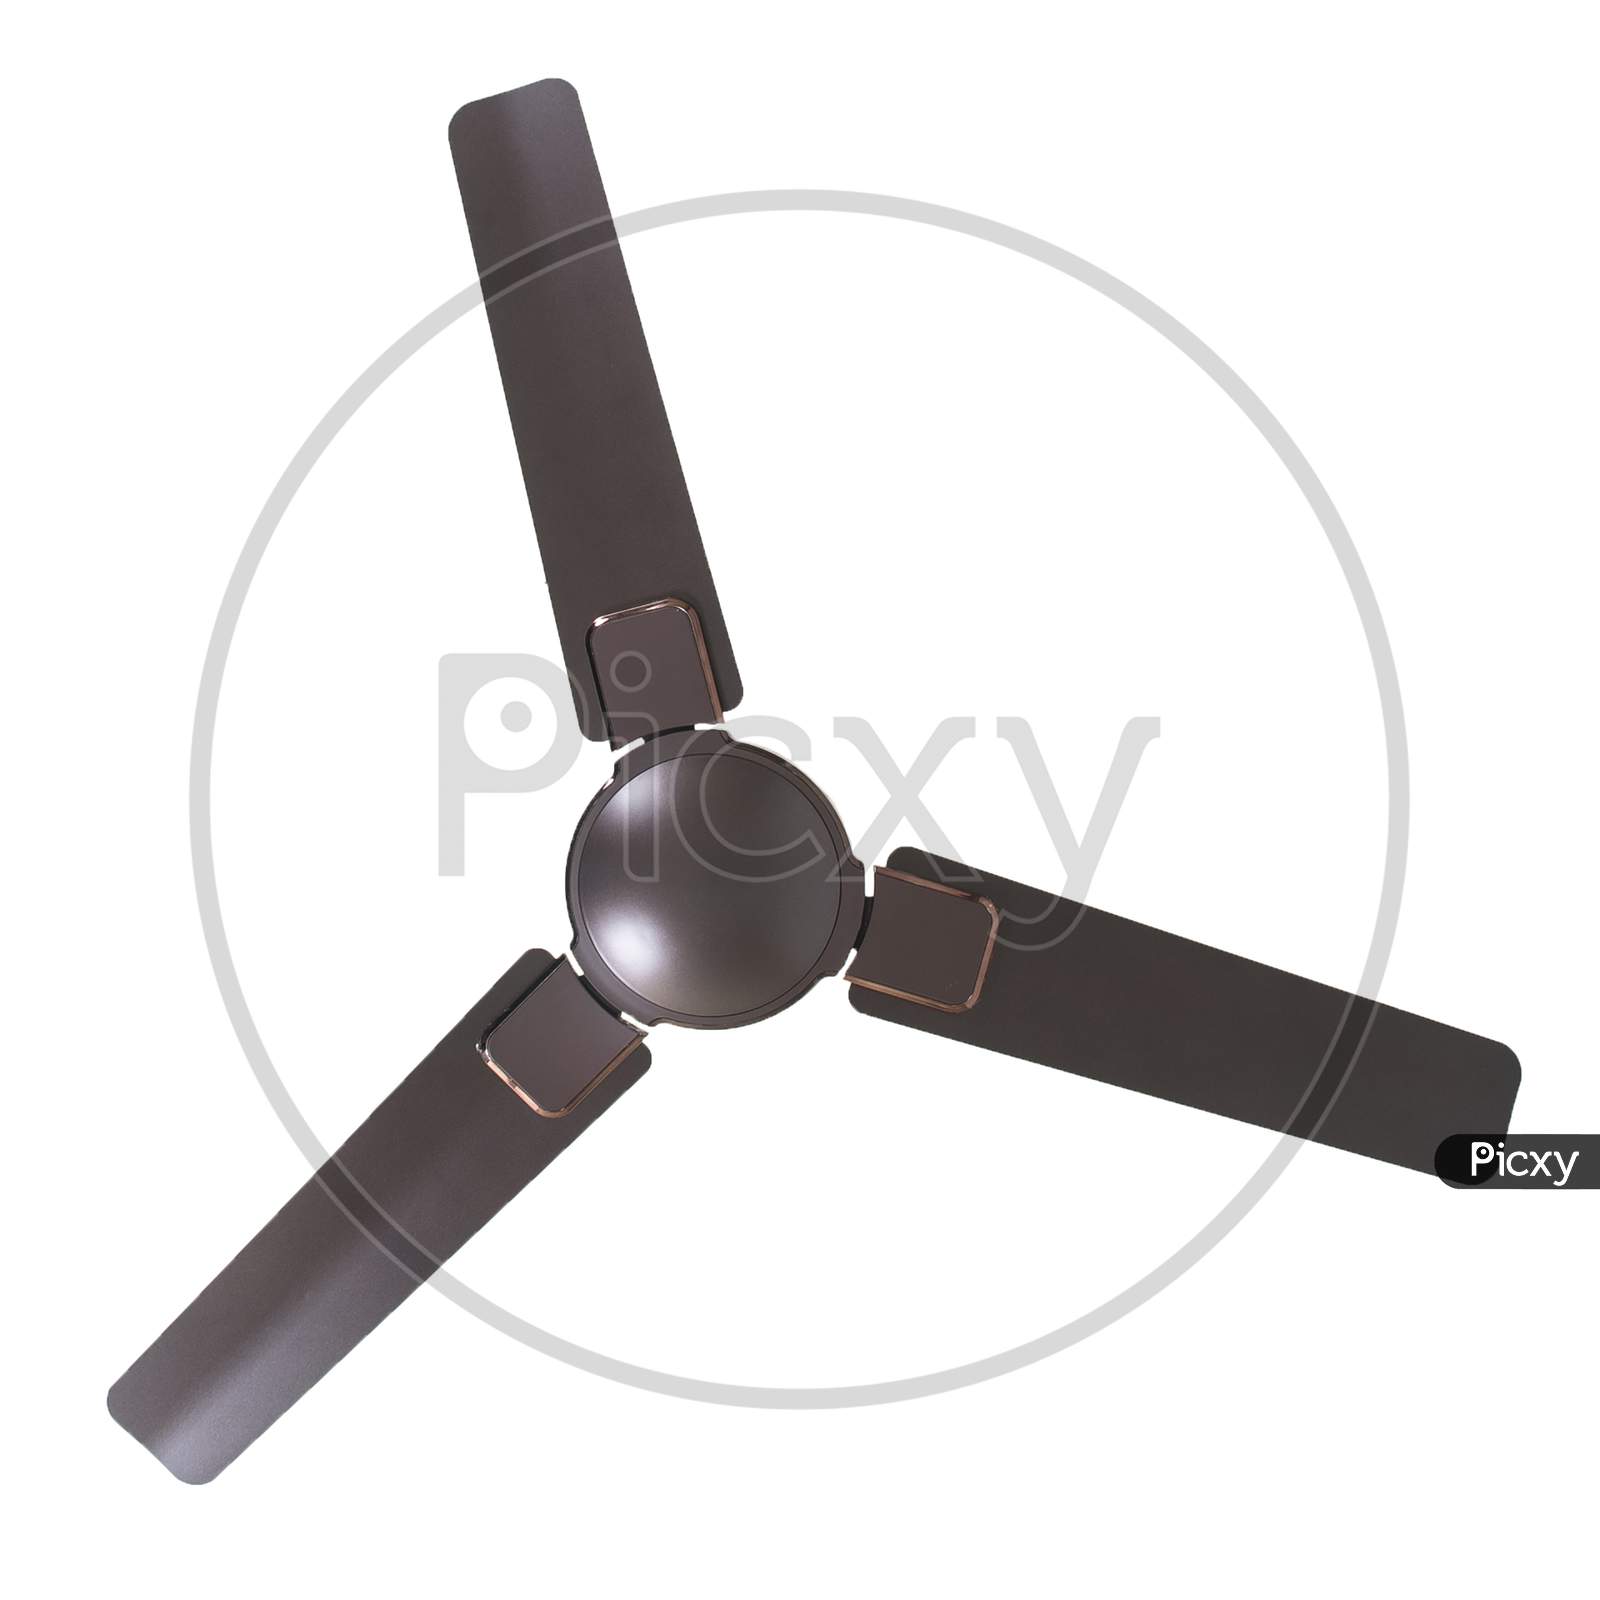 Electronic And Hardware Parts Of Ceiling Fan Over an Isolated White Background